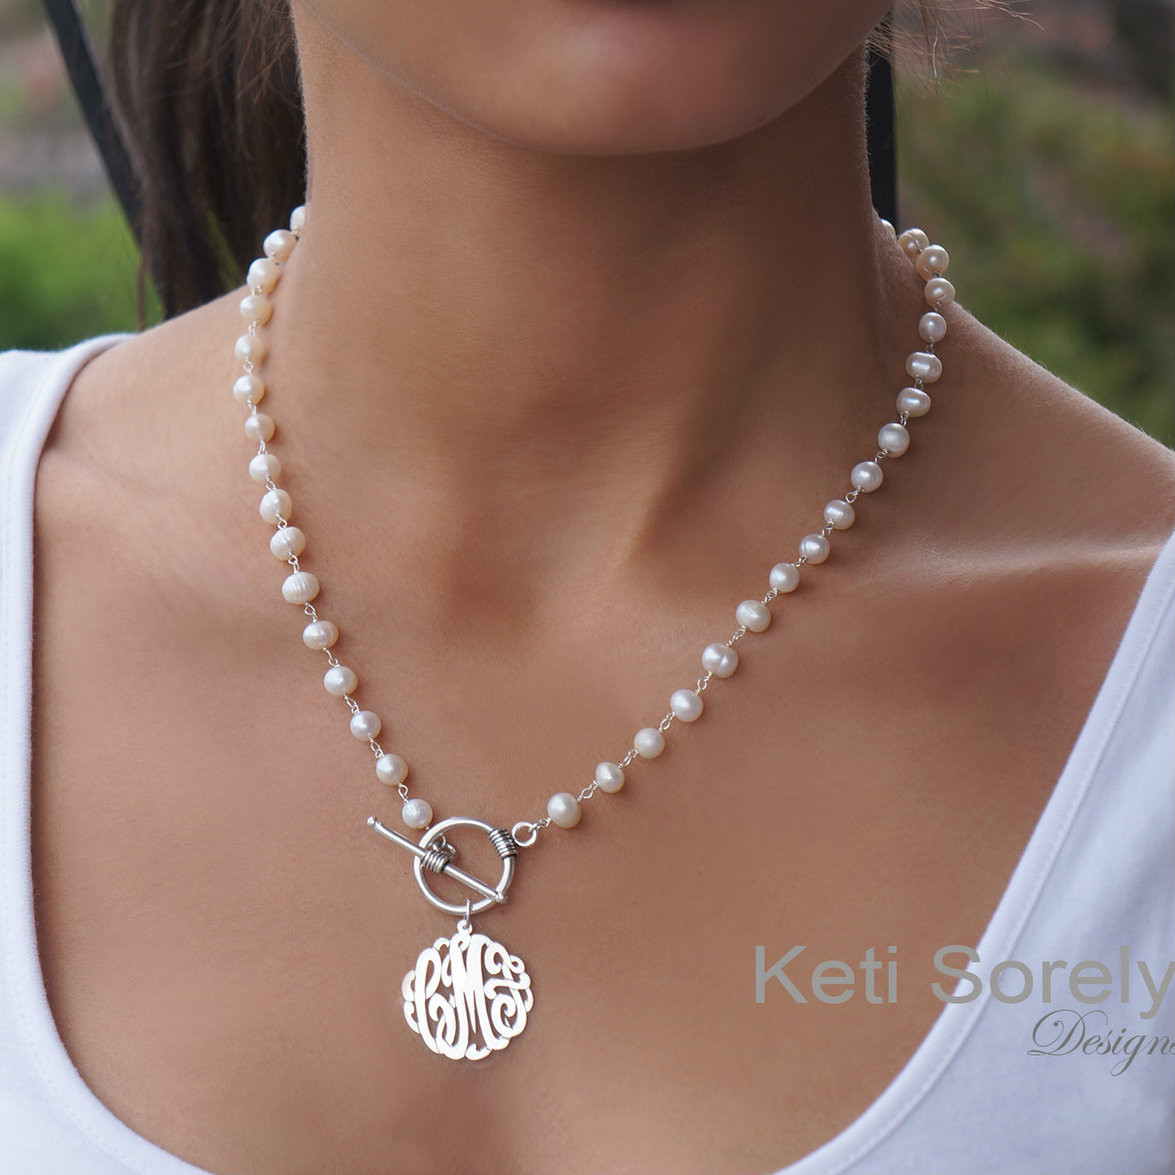 Handmade personalized Pearl Necklace with Monogram Initials charm and  toggle clasp - White freshwater pearls